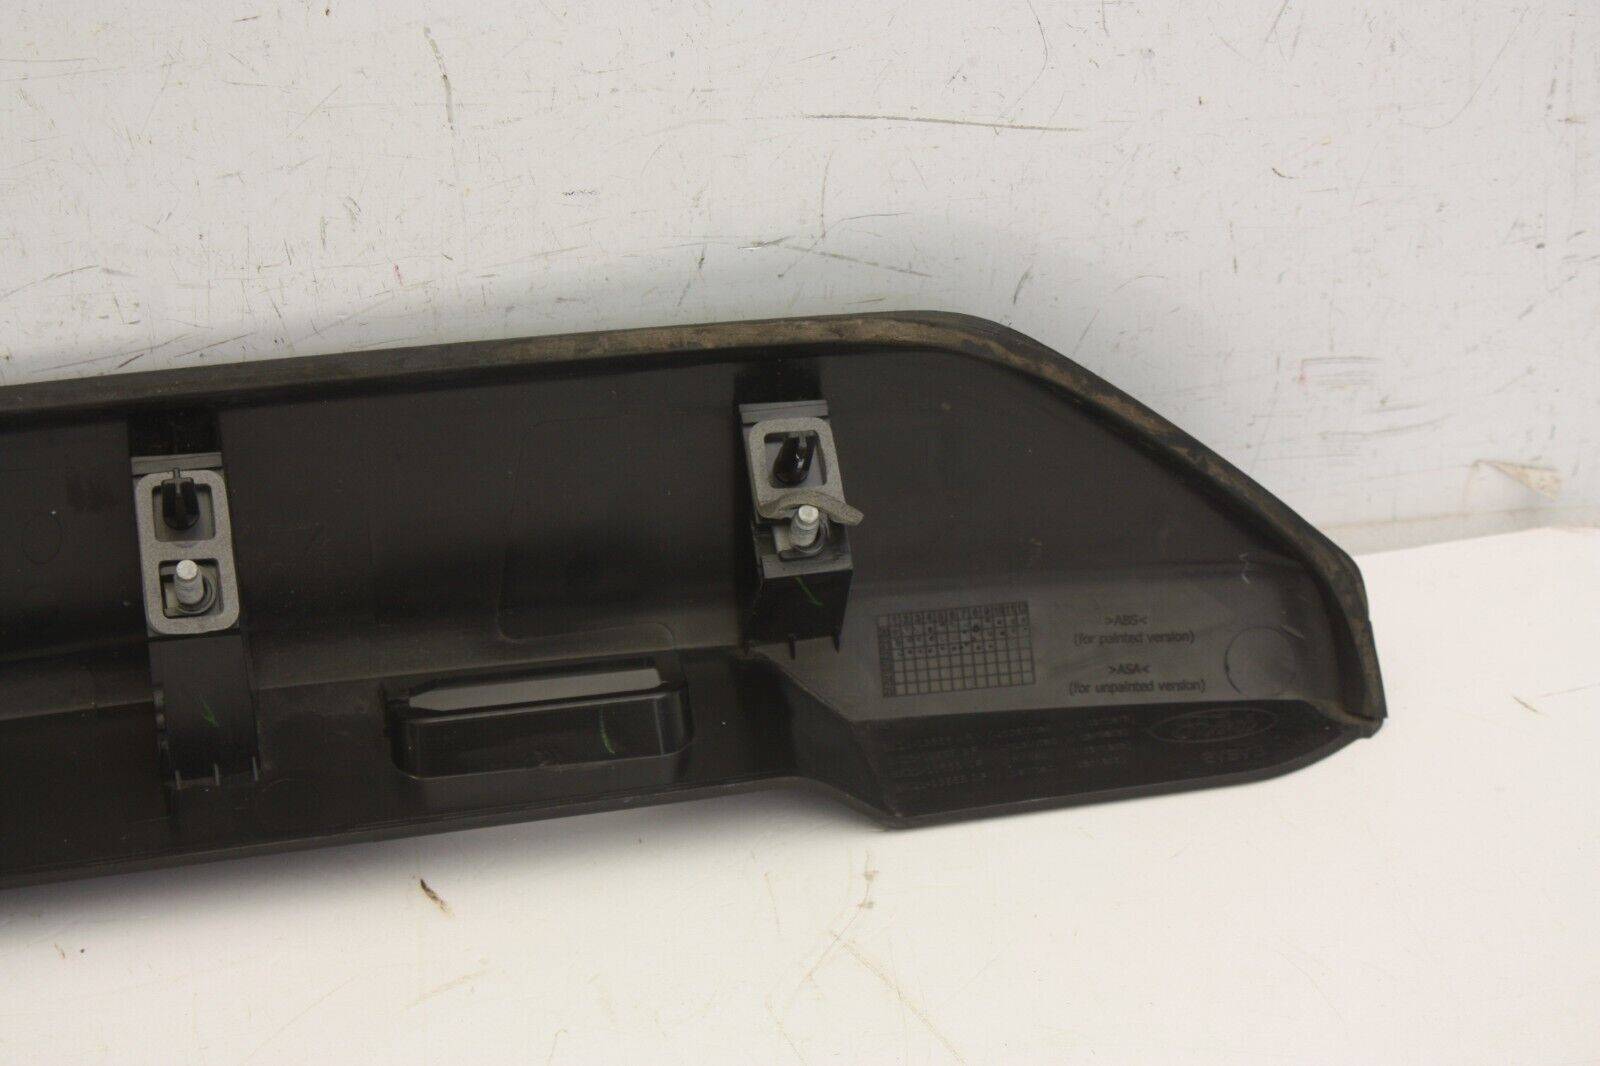 Ford-Transit-Custom-Tailgate-Lid-Cover-Recording-Bar-2018-ON-BK21-13555-AFW-176302846649-13